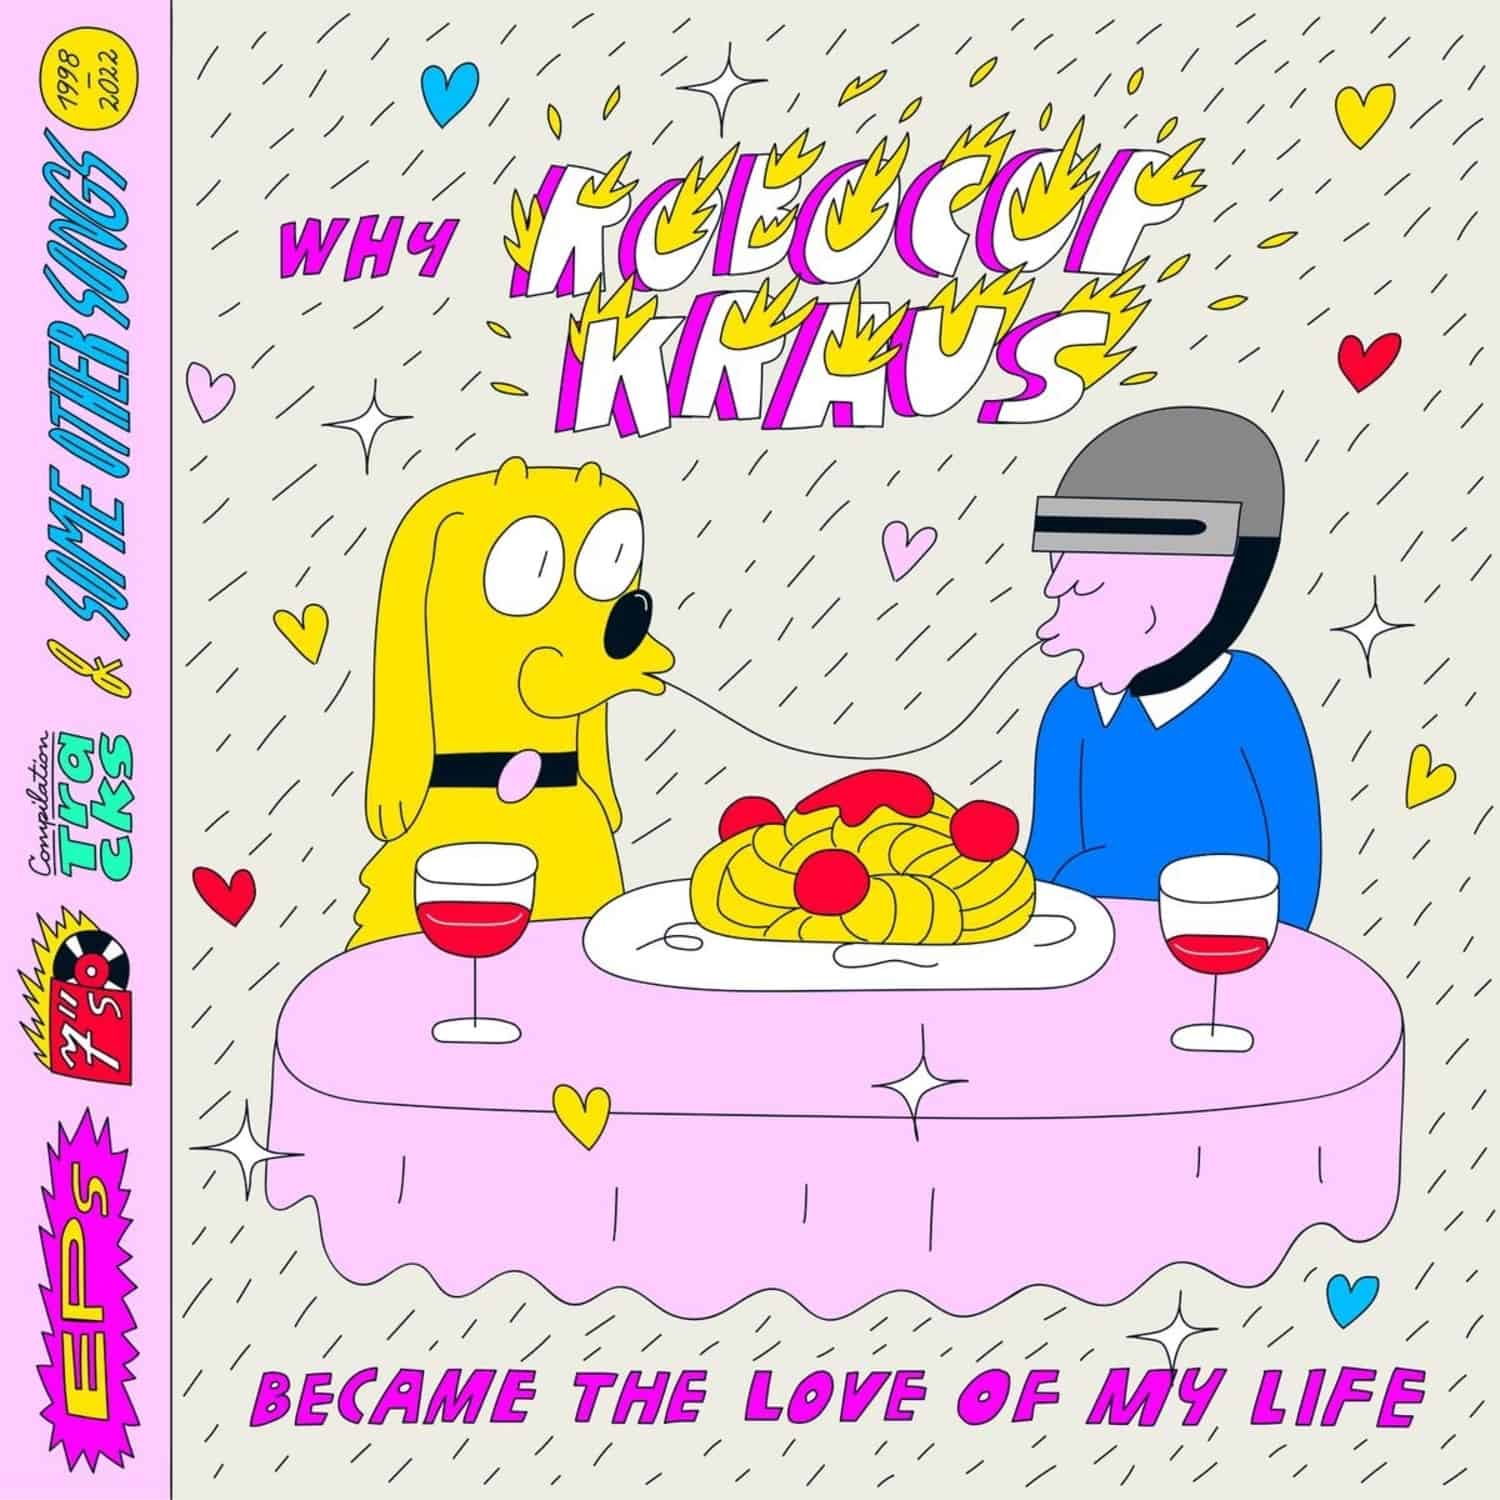 Robocop Kraus - WHY ROBOCOP KRAUS BECAME THE LOVE OF MY LIFE 